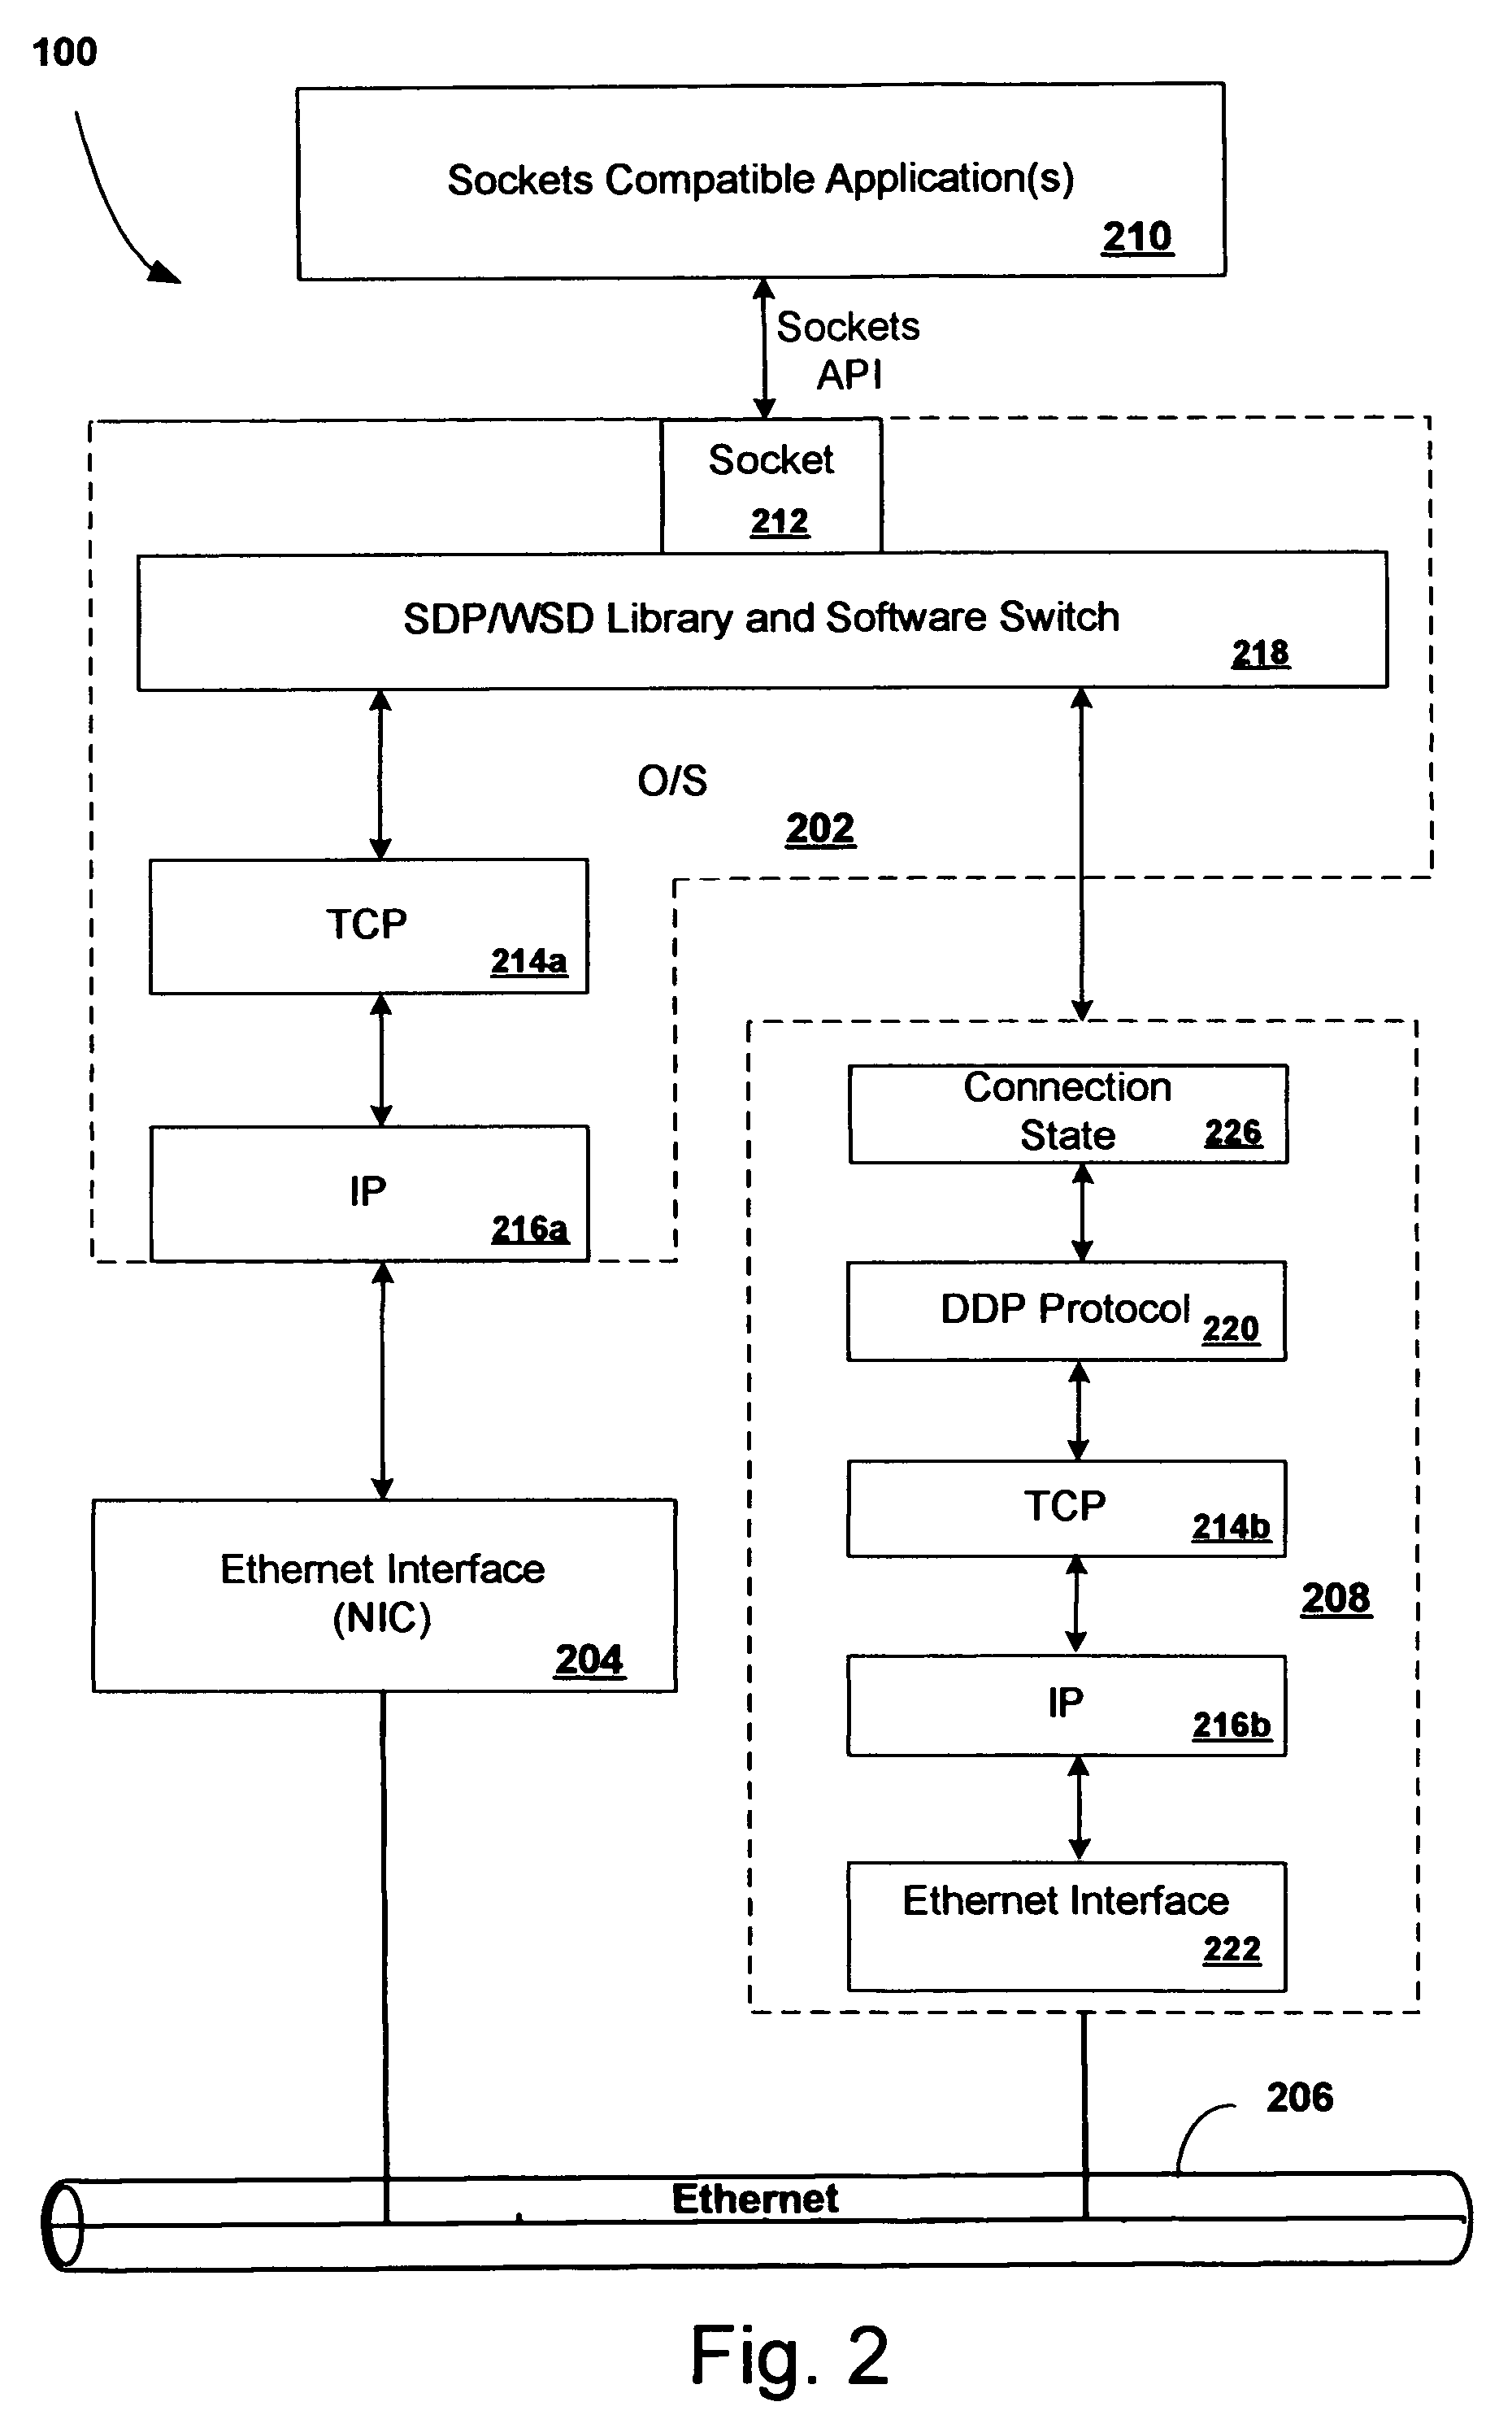 Aggregation over multiple processing nodes of network resources each providing offloaded connections between applications over a network